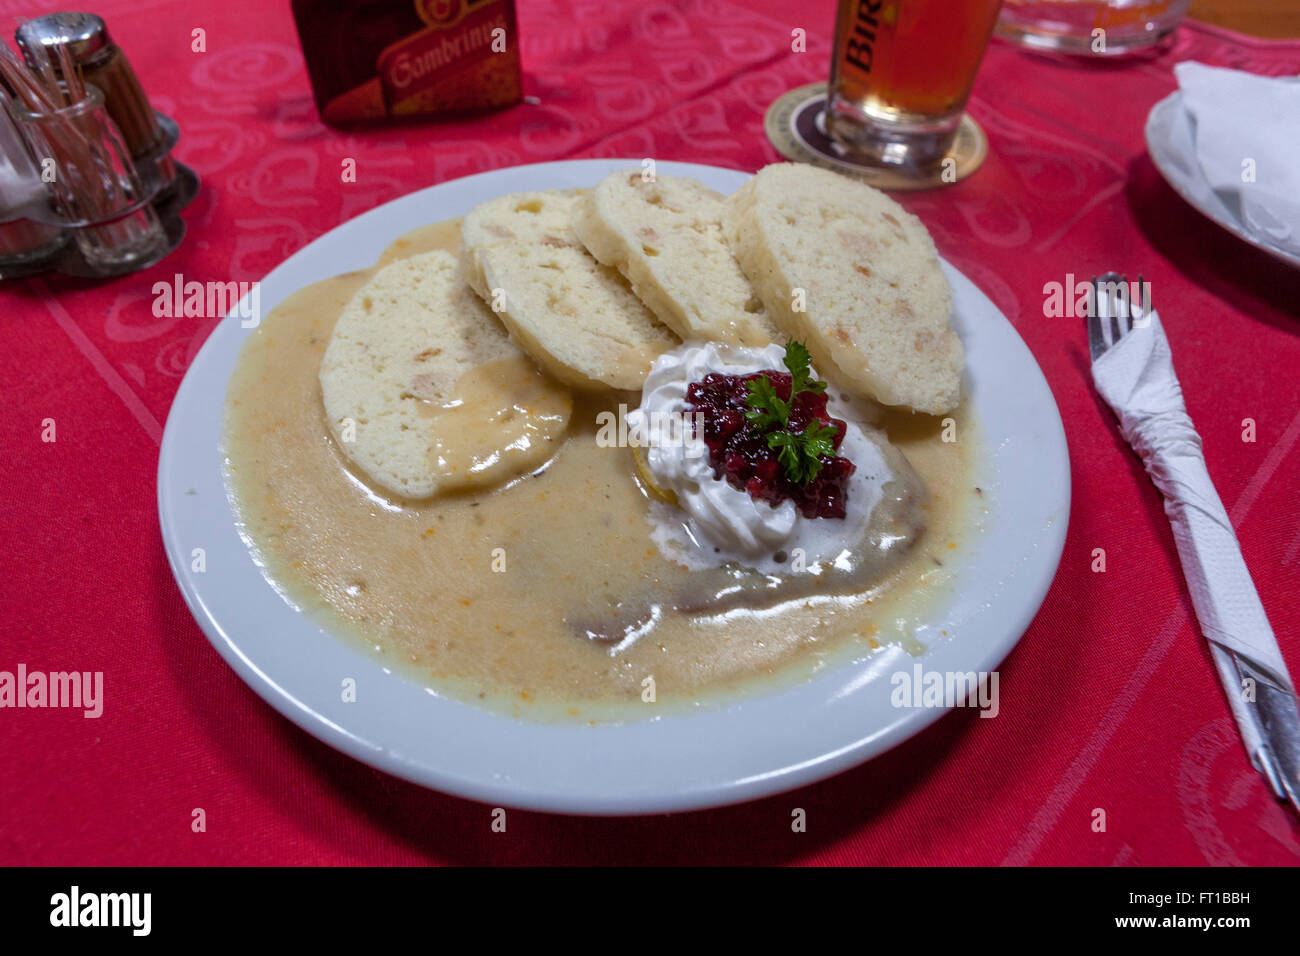 Czech food dumpling Sirloin on beef in cream sauce with cranberries served with dumplings, traditional cuisine Stock Photo